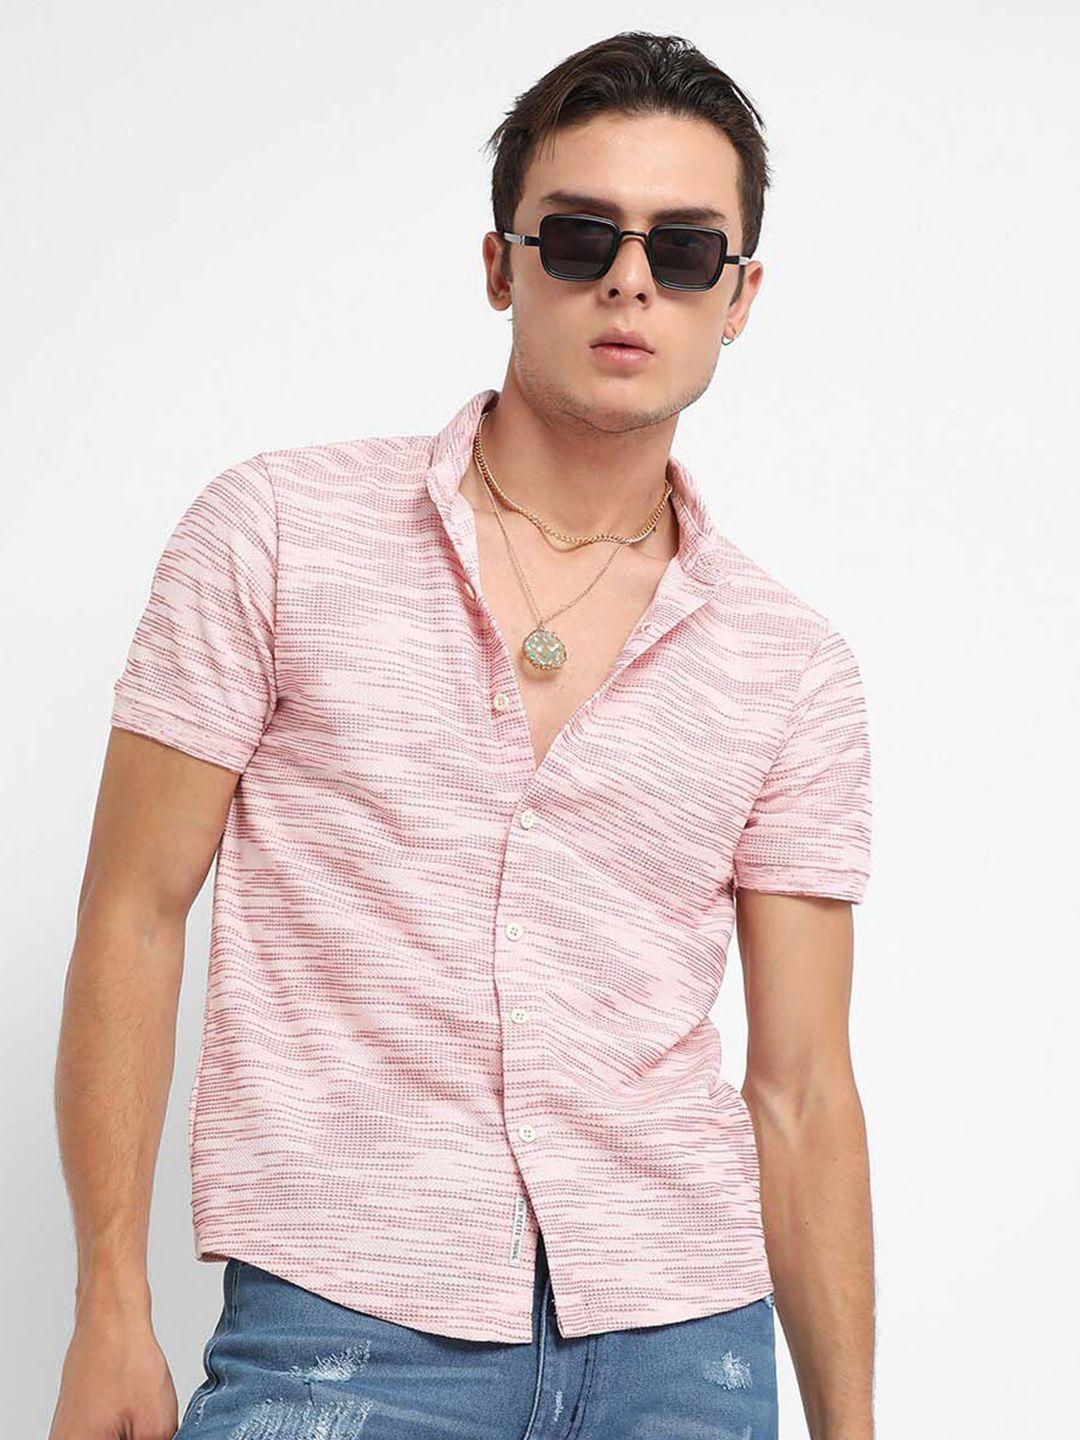 campus-sutra-horizontal-striped-classic-regular-fit-casual-shirt